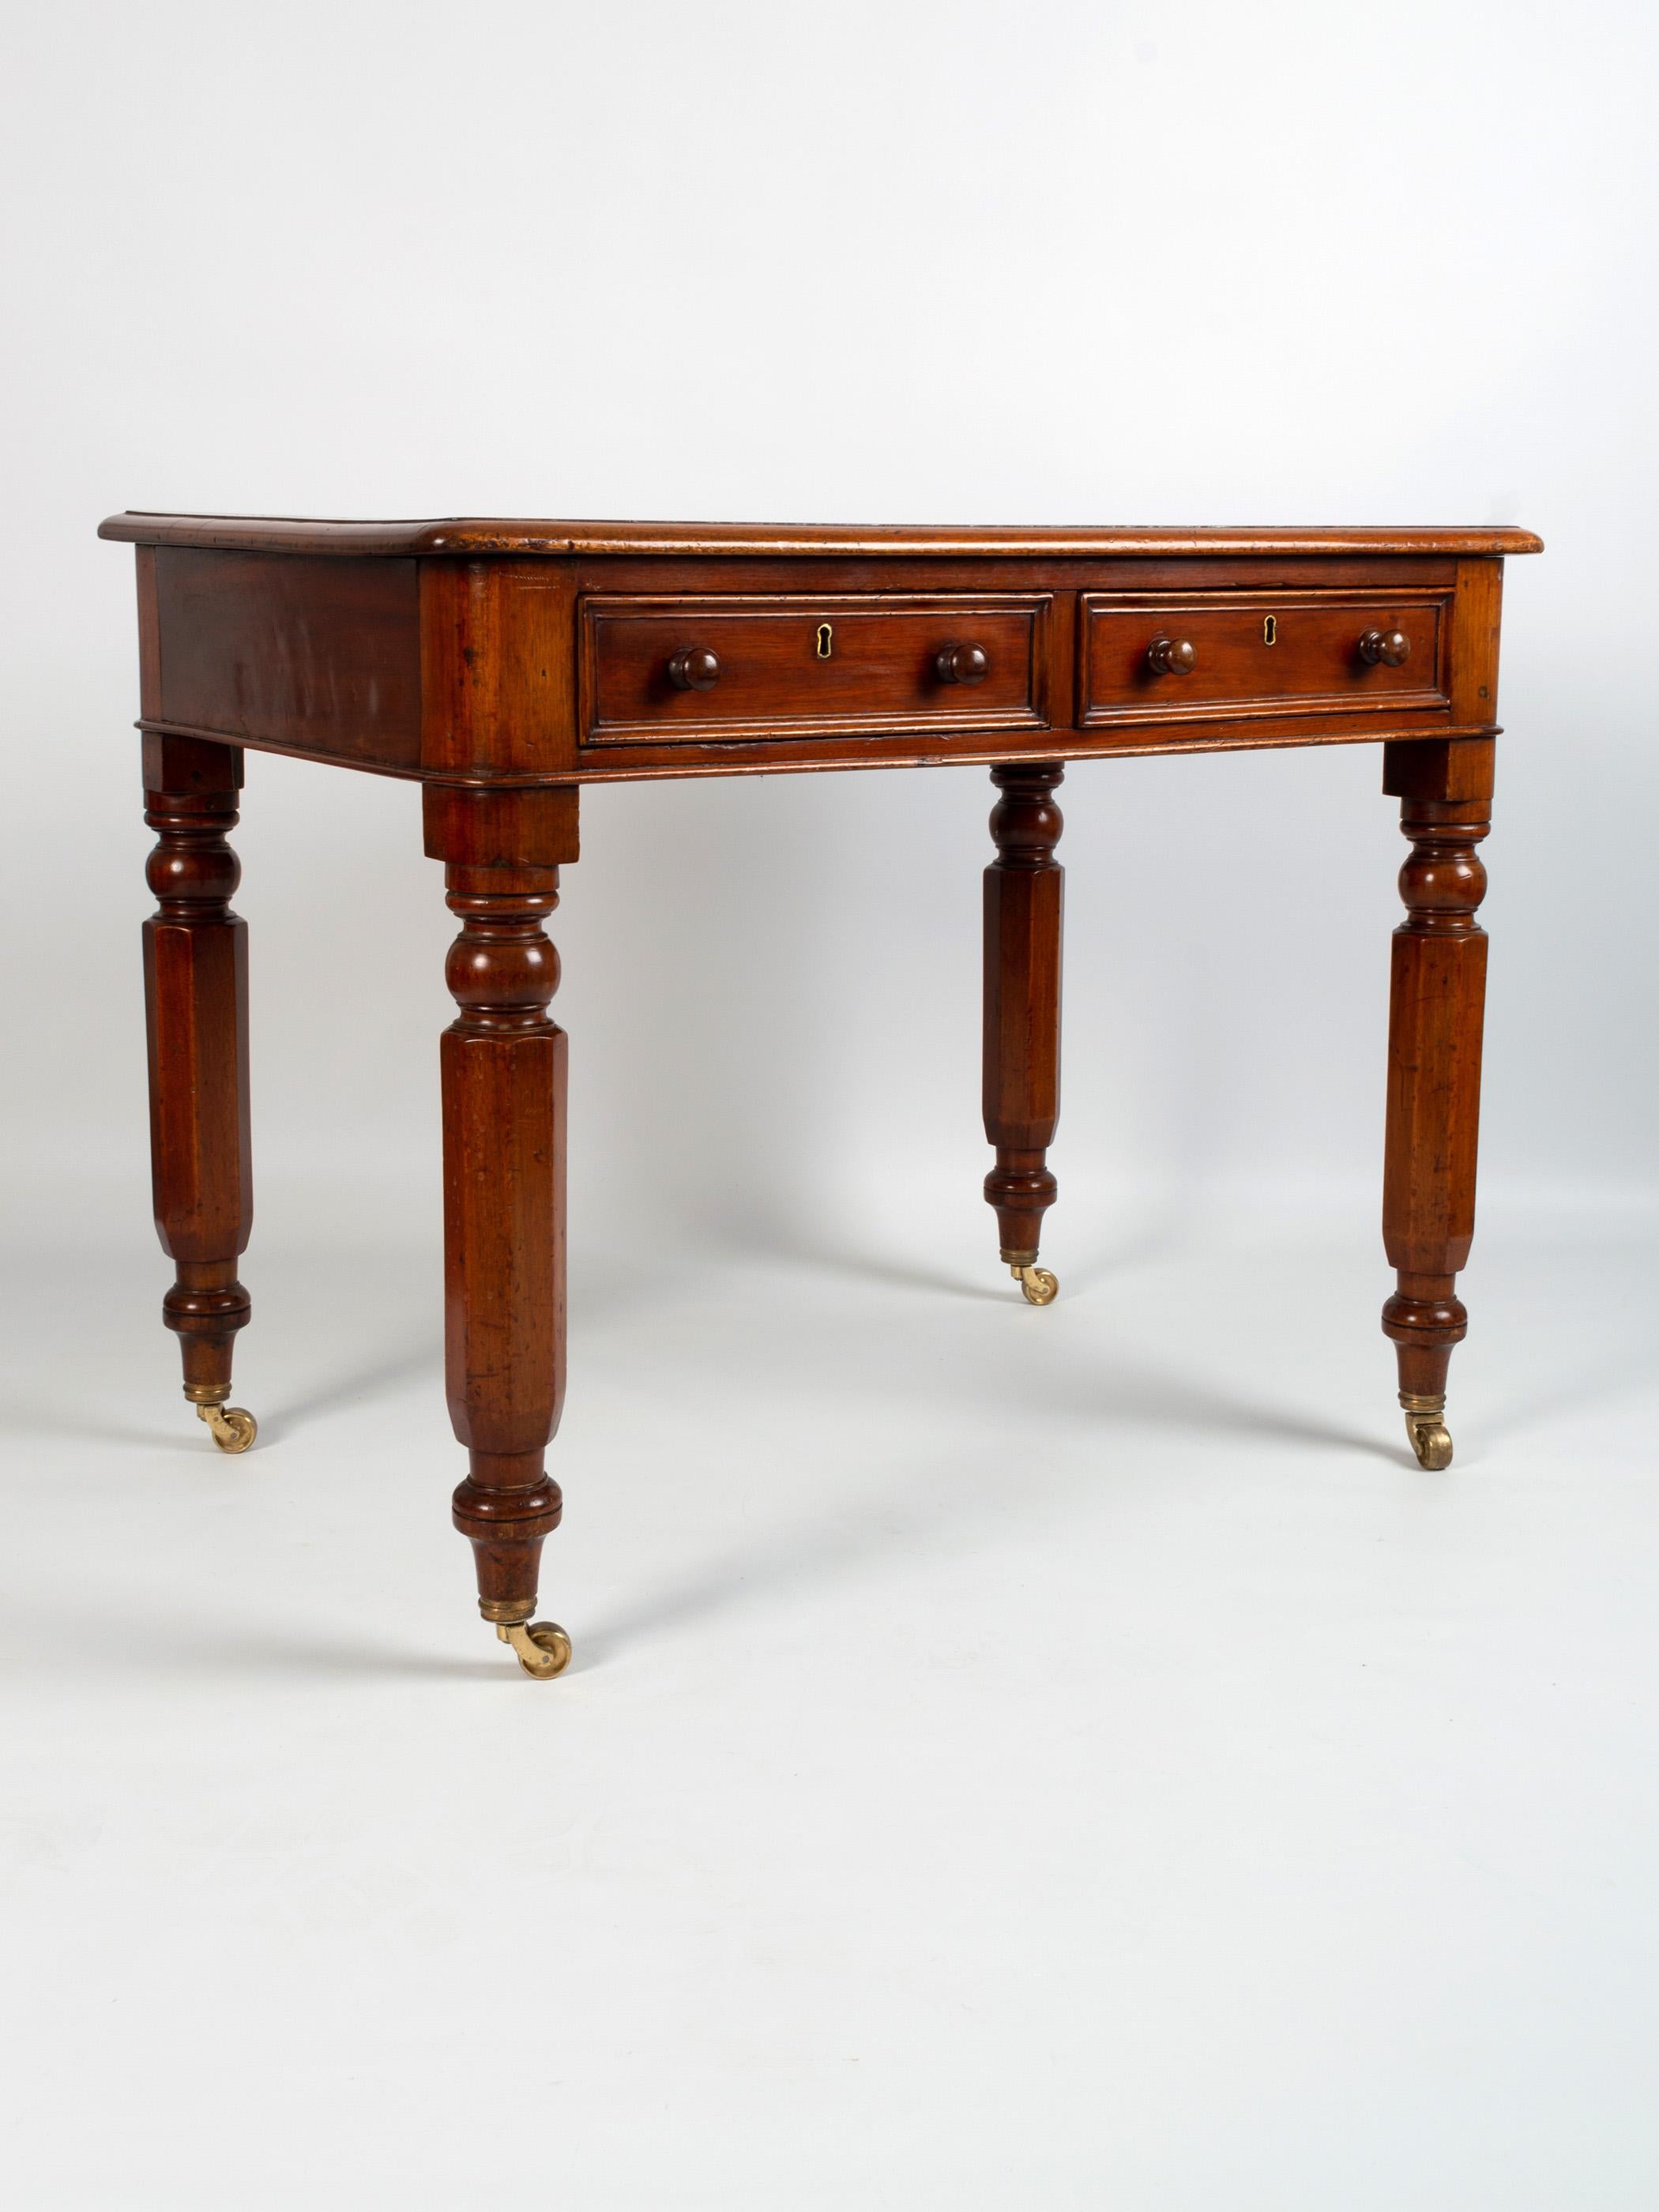 Antique 19th century English Mahogany and leather inset library table C.1840.

A neatly proportioned library desk with two drawers, standing on beautifully turned legs, terminating in brass castors.

This early Victorian example is presented in